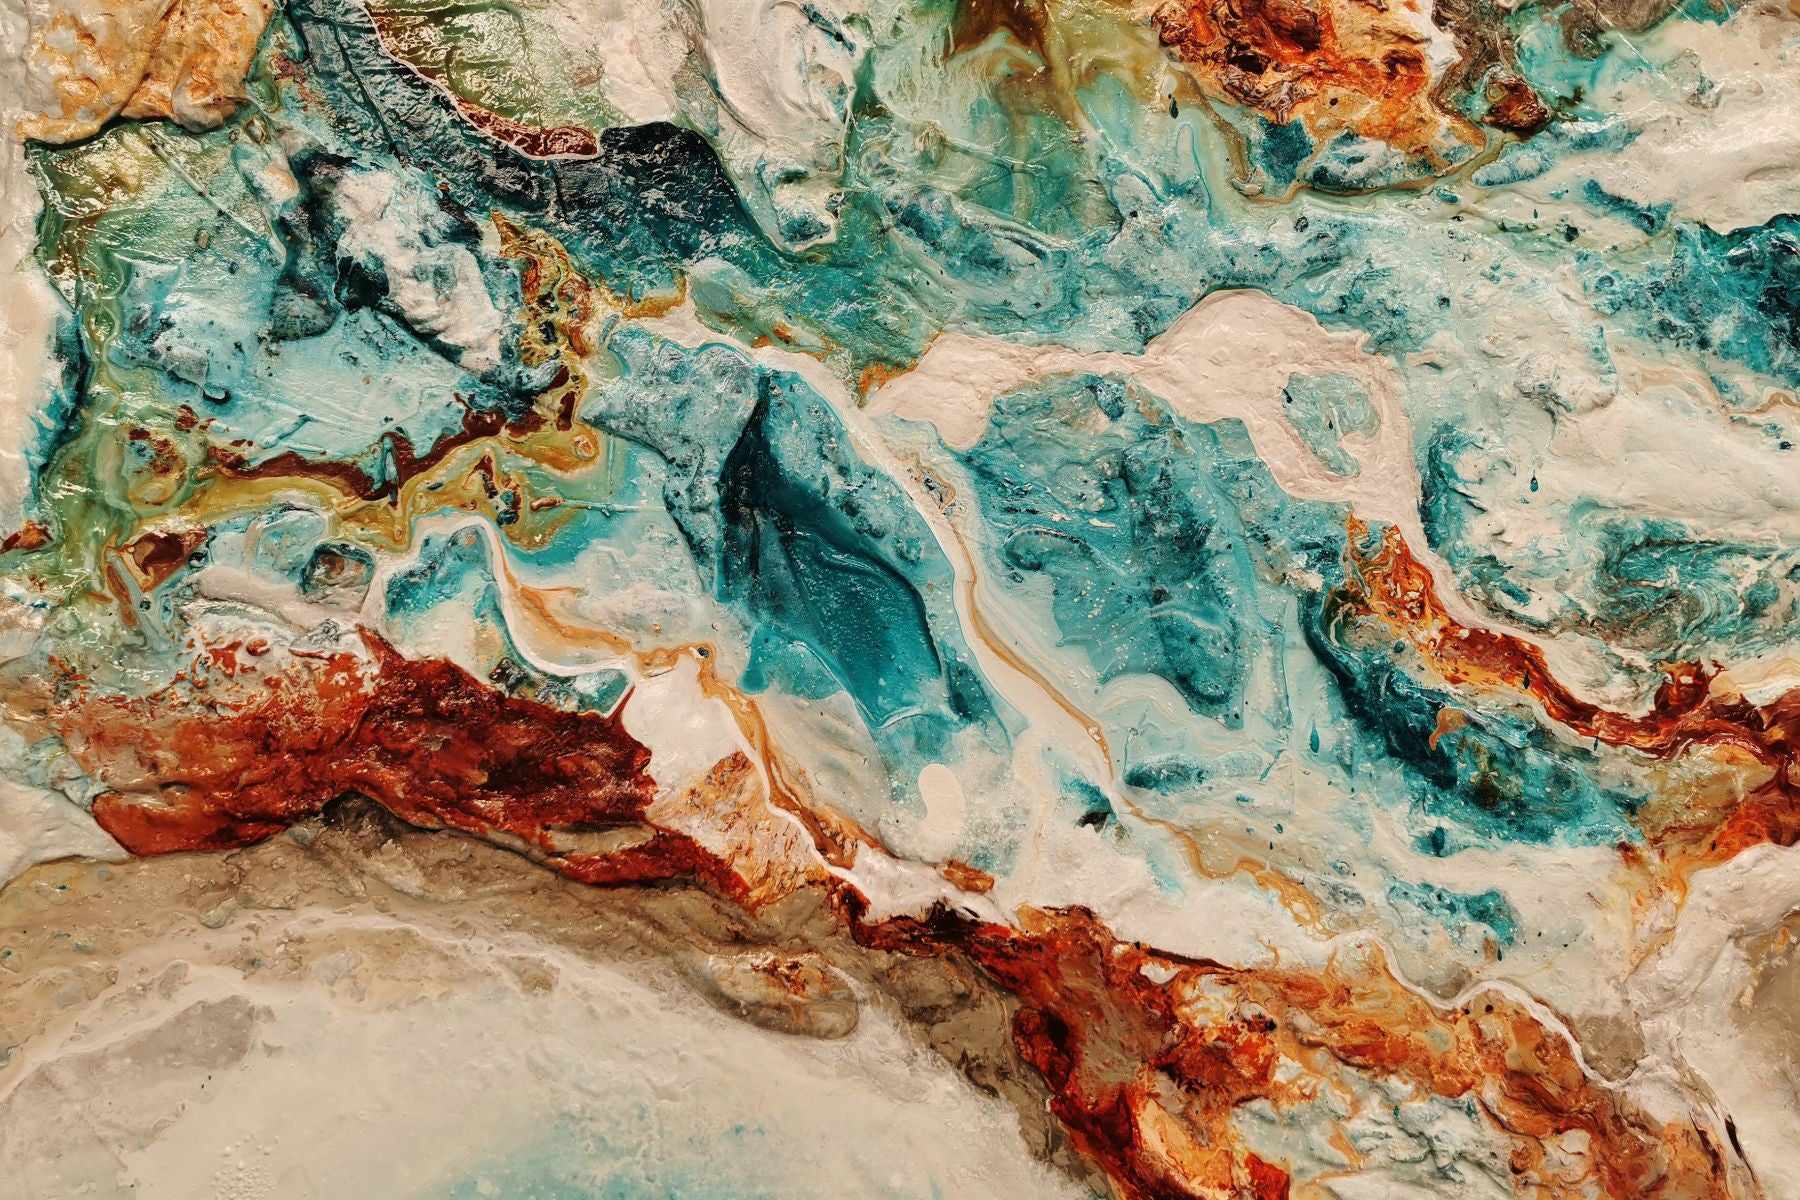 Ocean Surf Mist 240cm x 120cm Turquoise Rust White Textured Abstract Painting (SOLD)